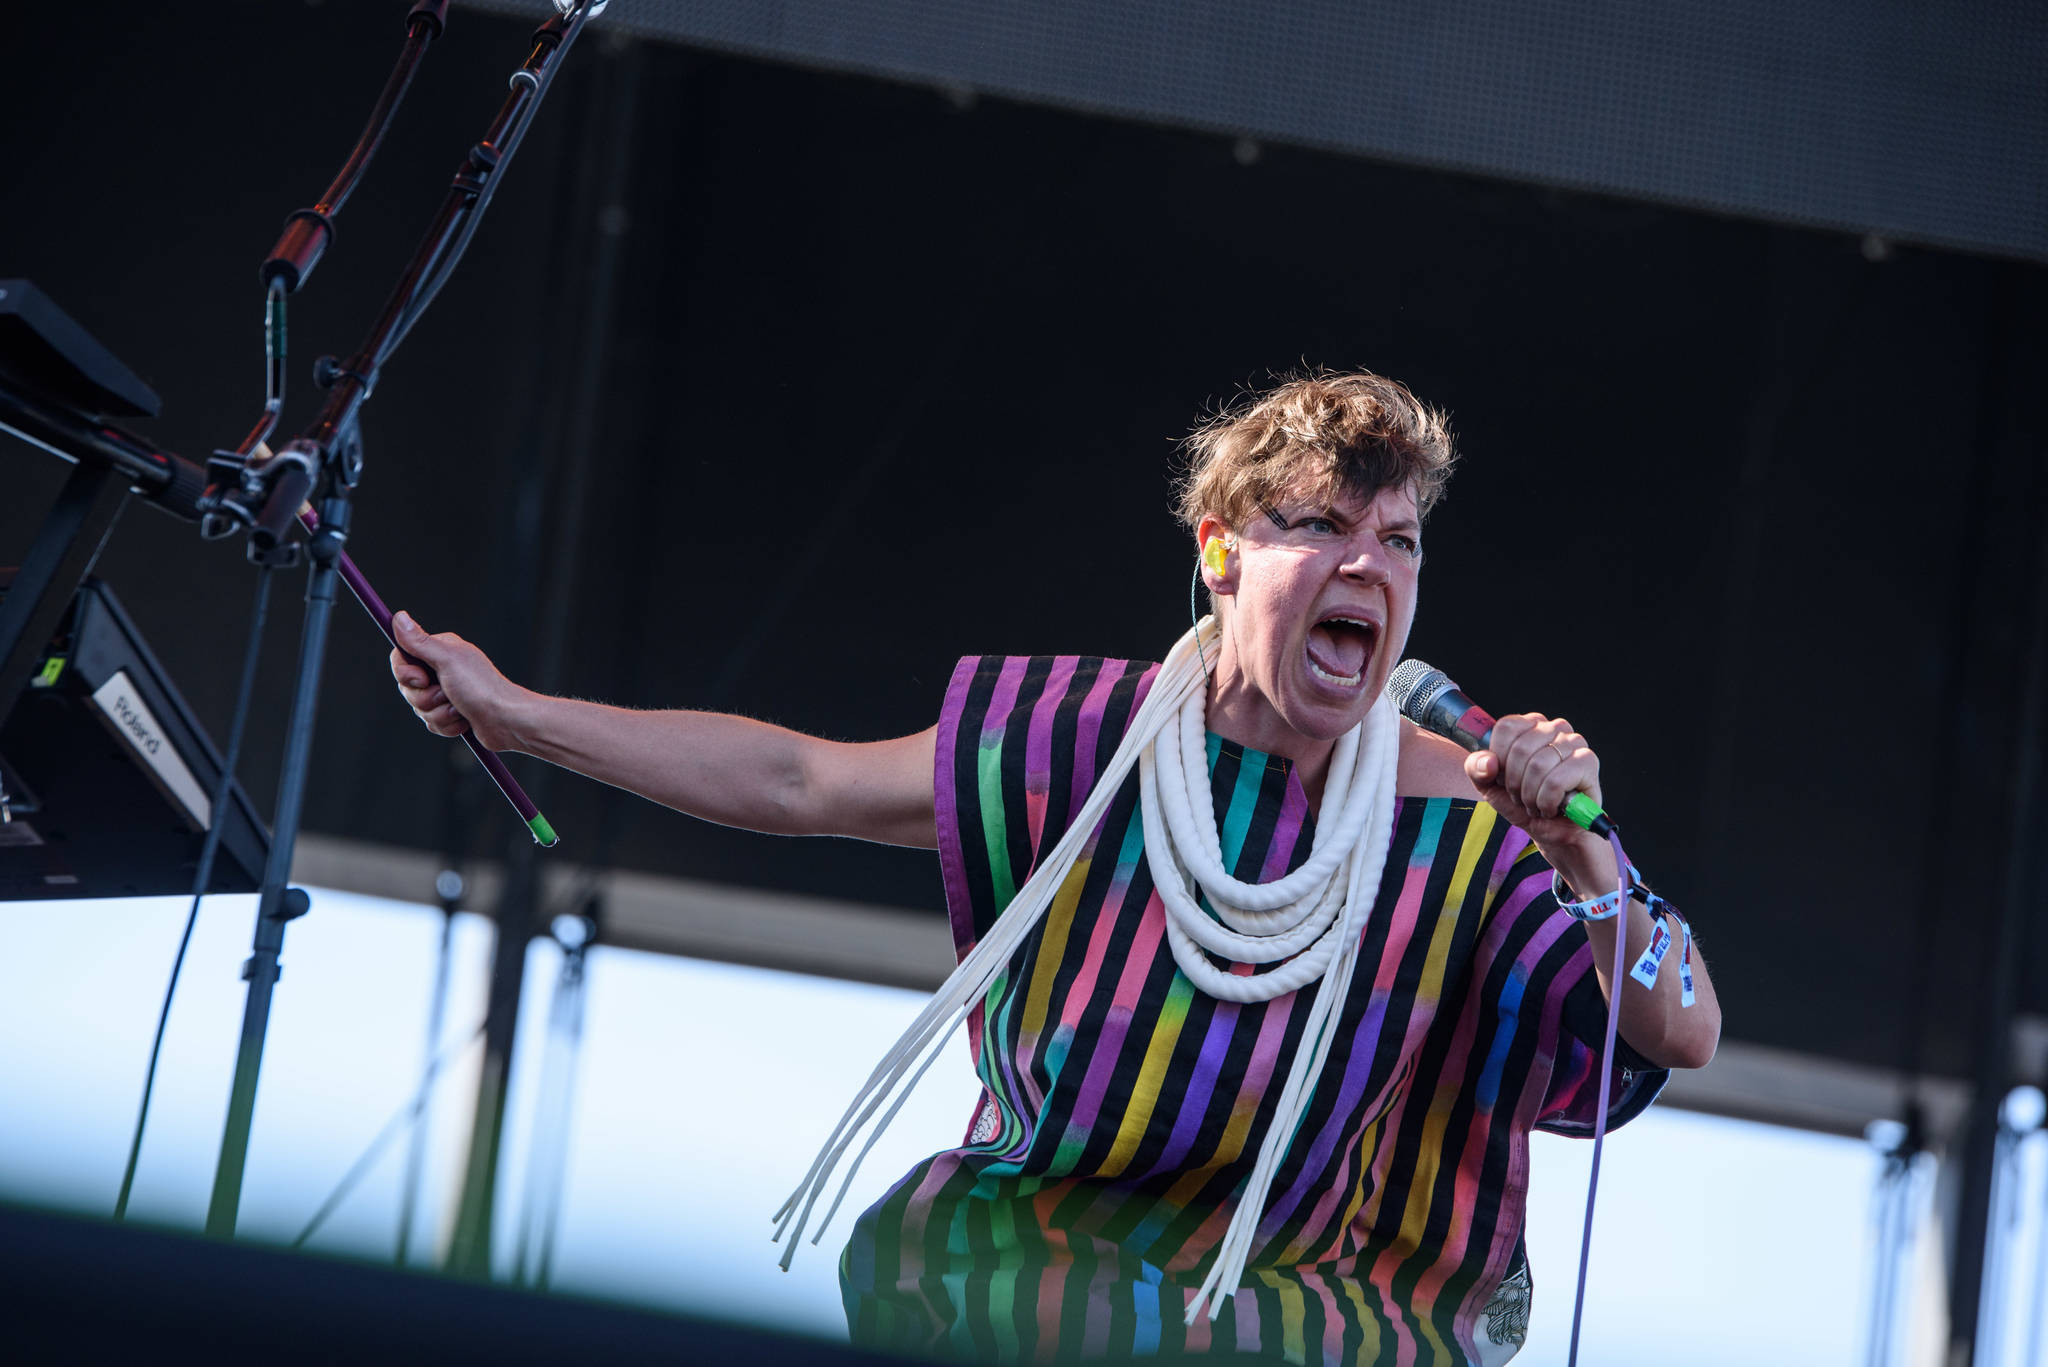 Merrill Garbus of Tune-Yards displays an array of emotions when performing.